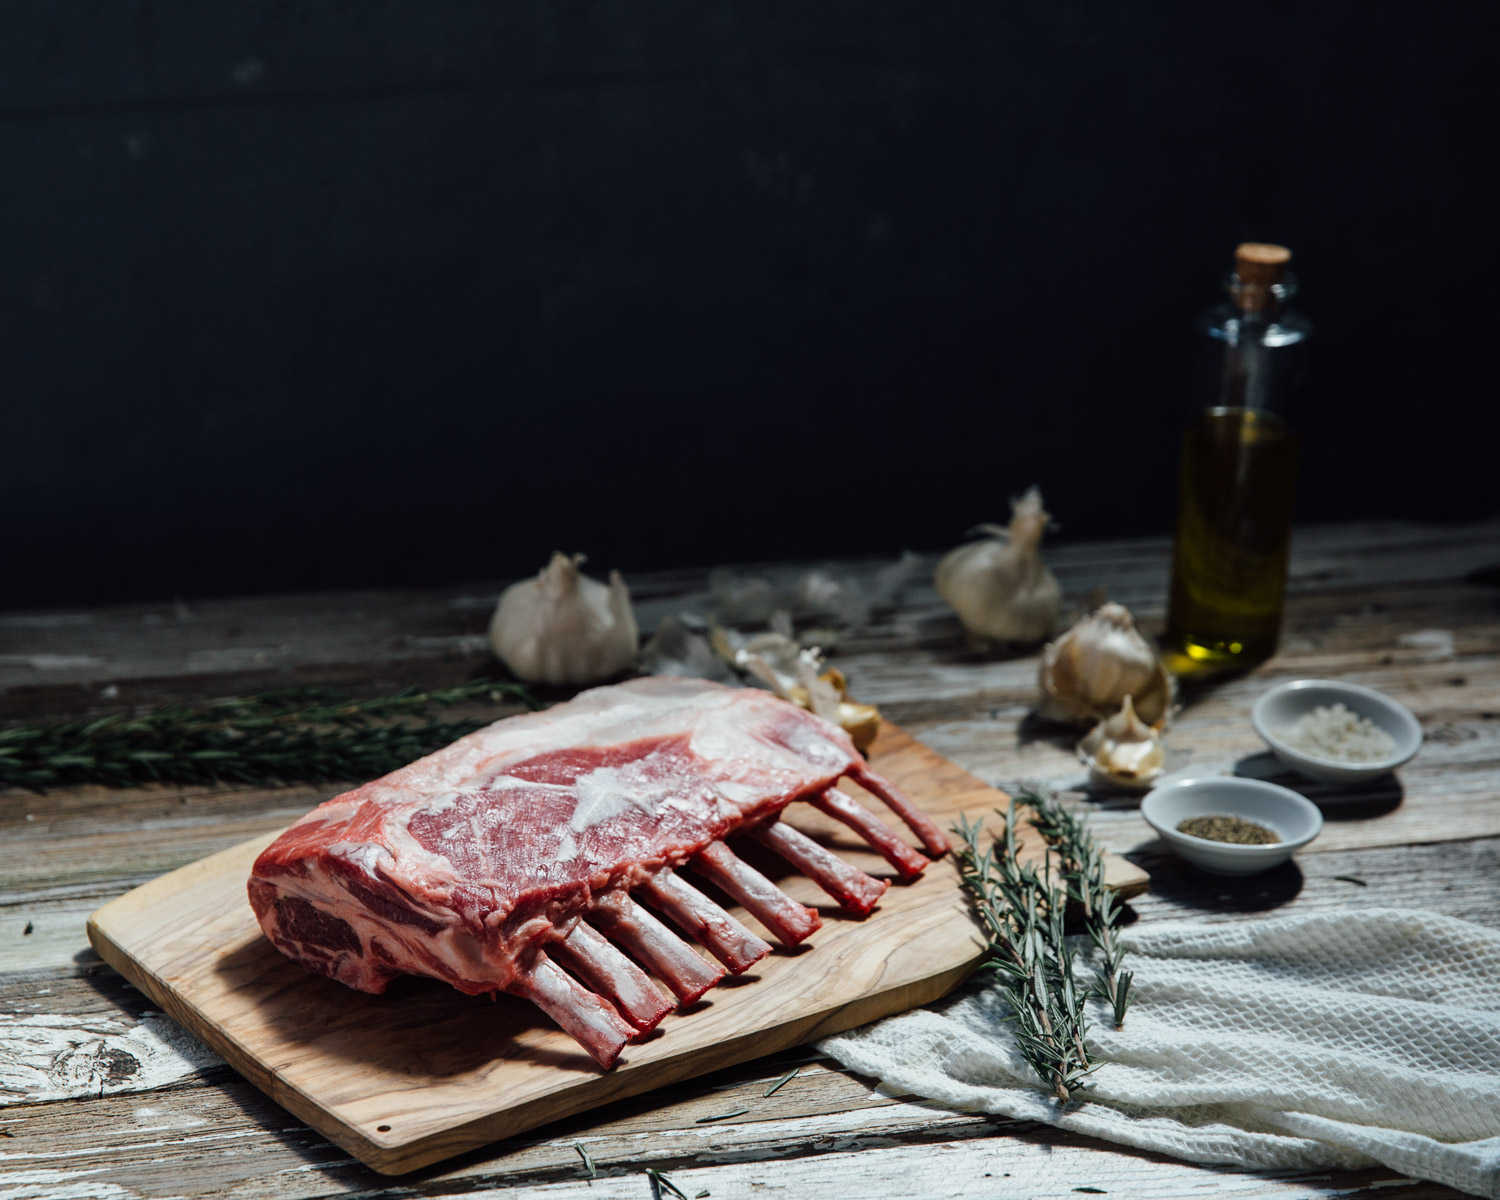 Order fresh never frozen all natural lamb rack from premier meat company for a delicious valentine's meal.